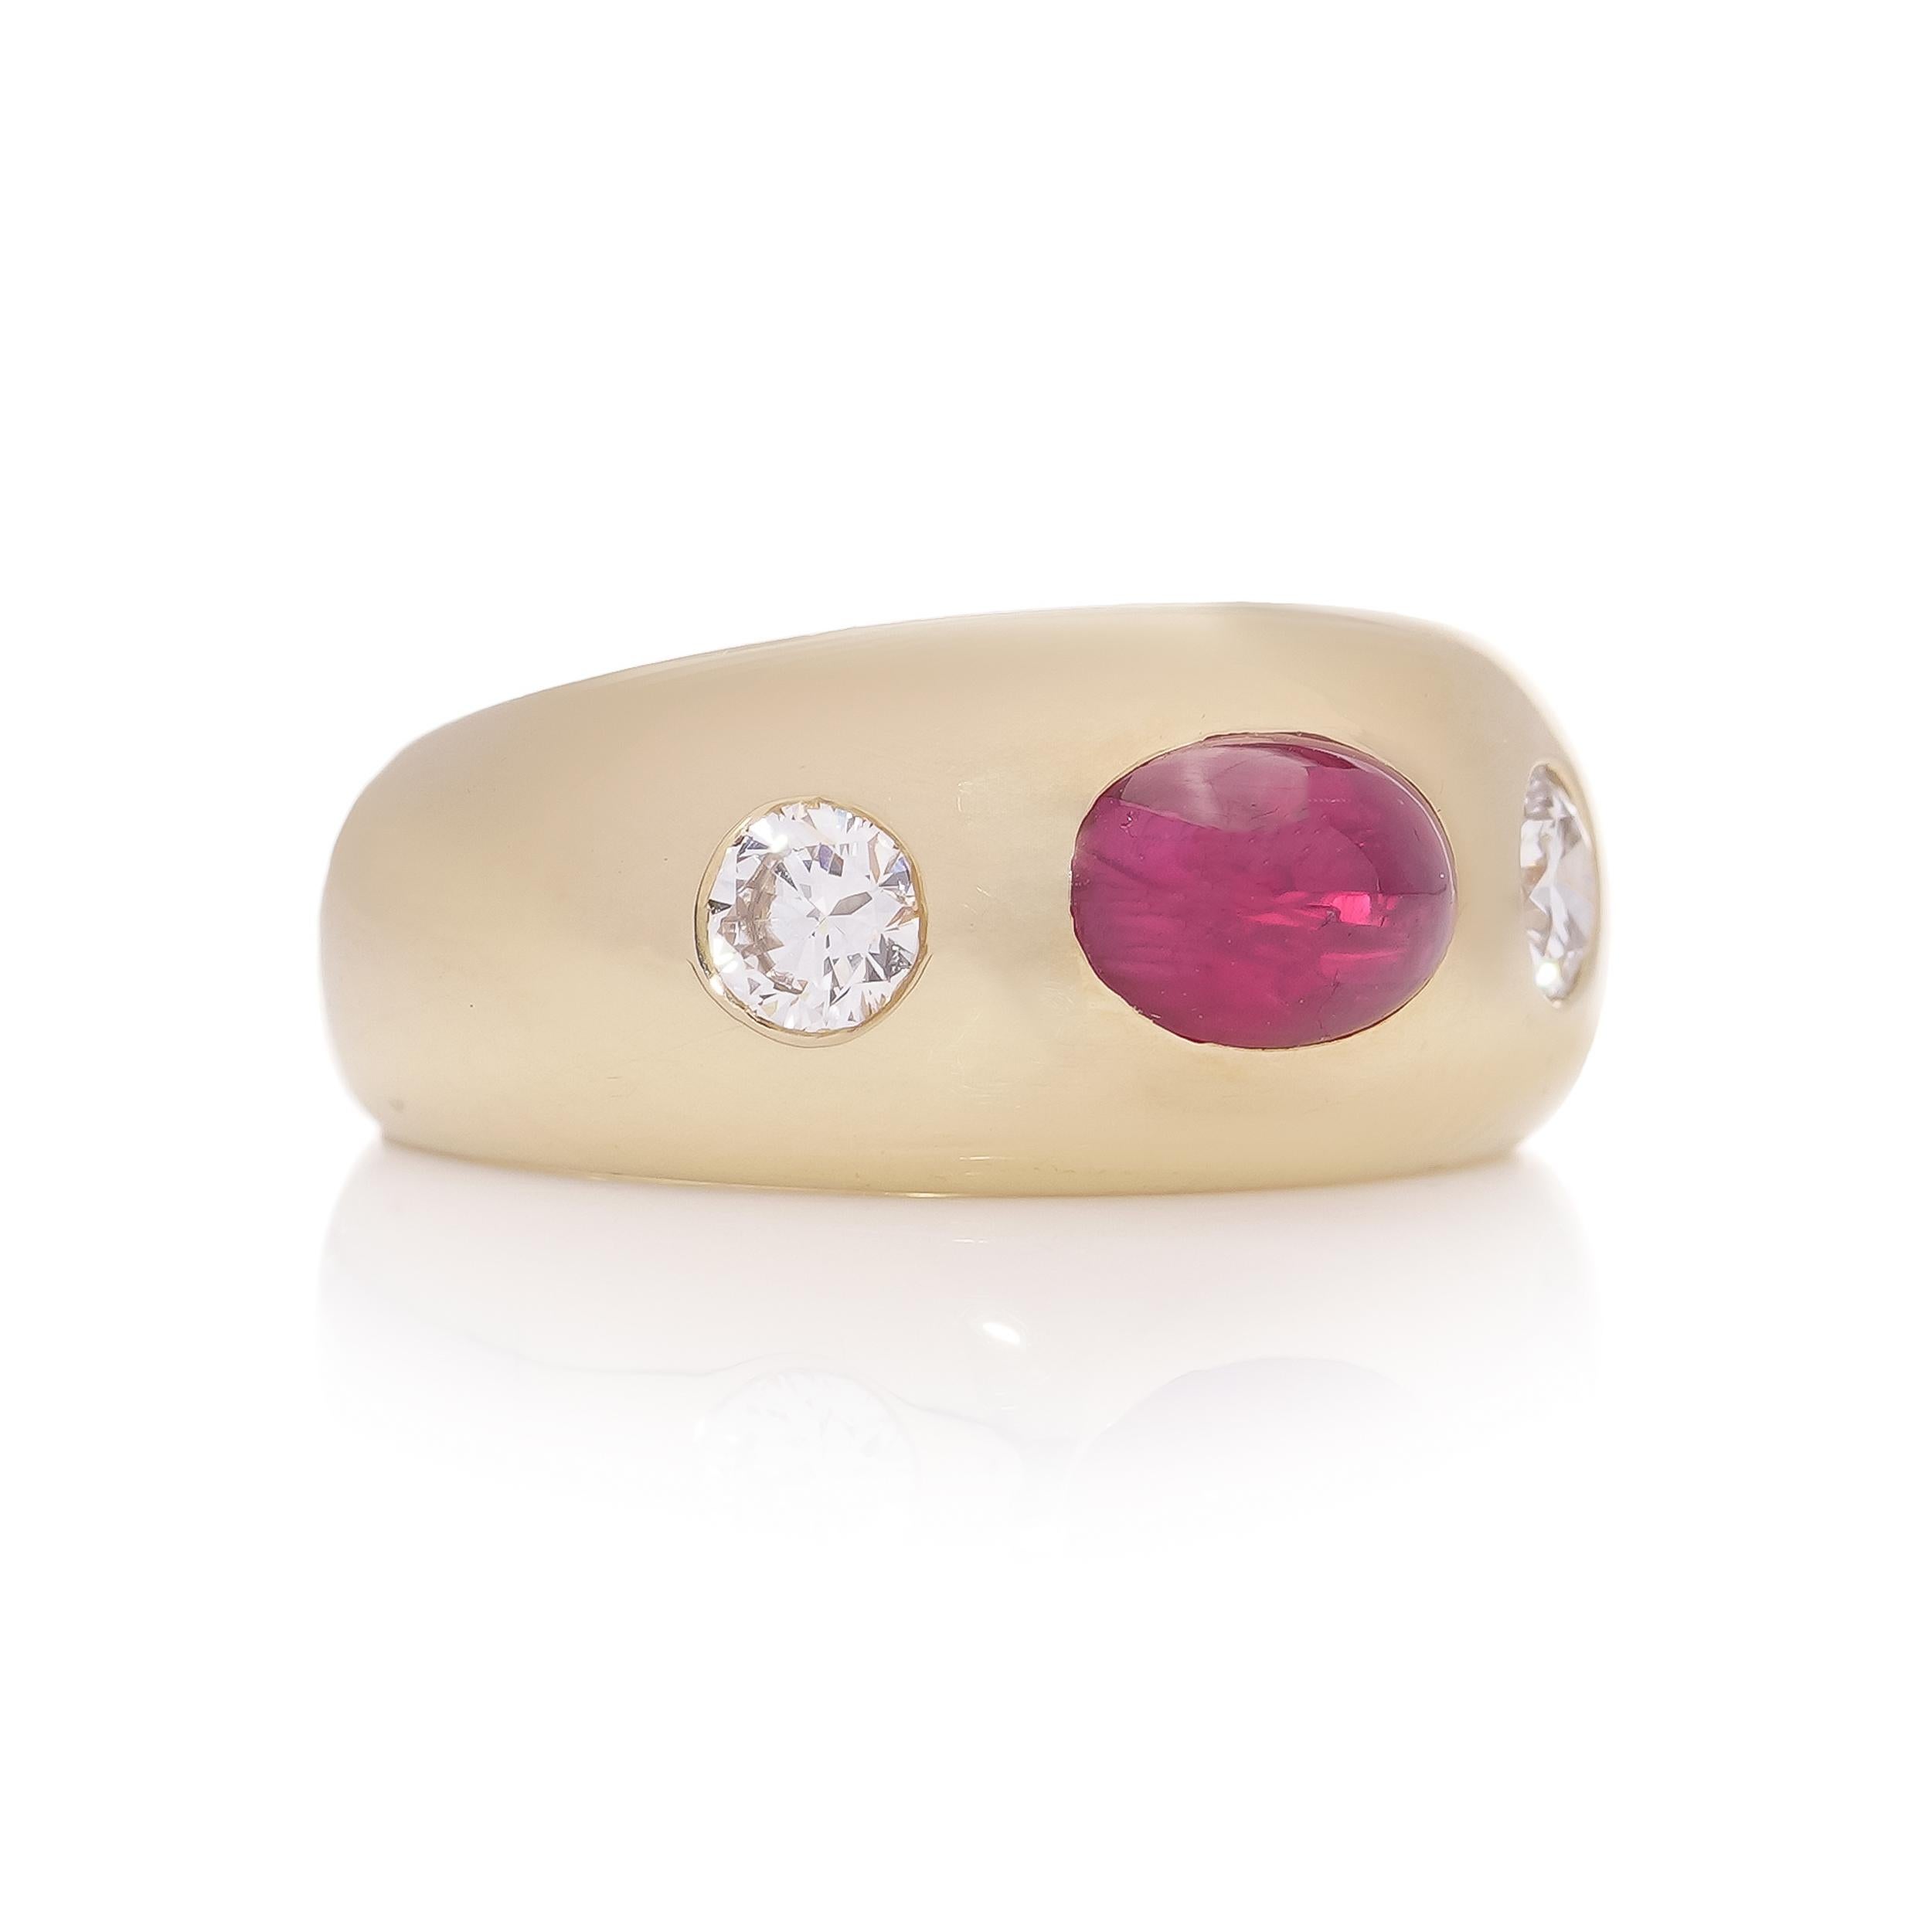 Old European Cut Bvlgari 18kt. gold three - stone Burma Cabochon ruby and diamond ring For Sale